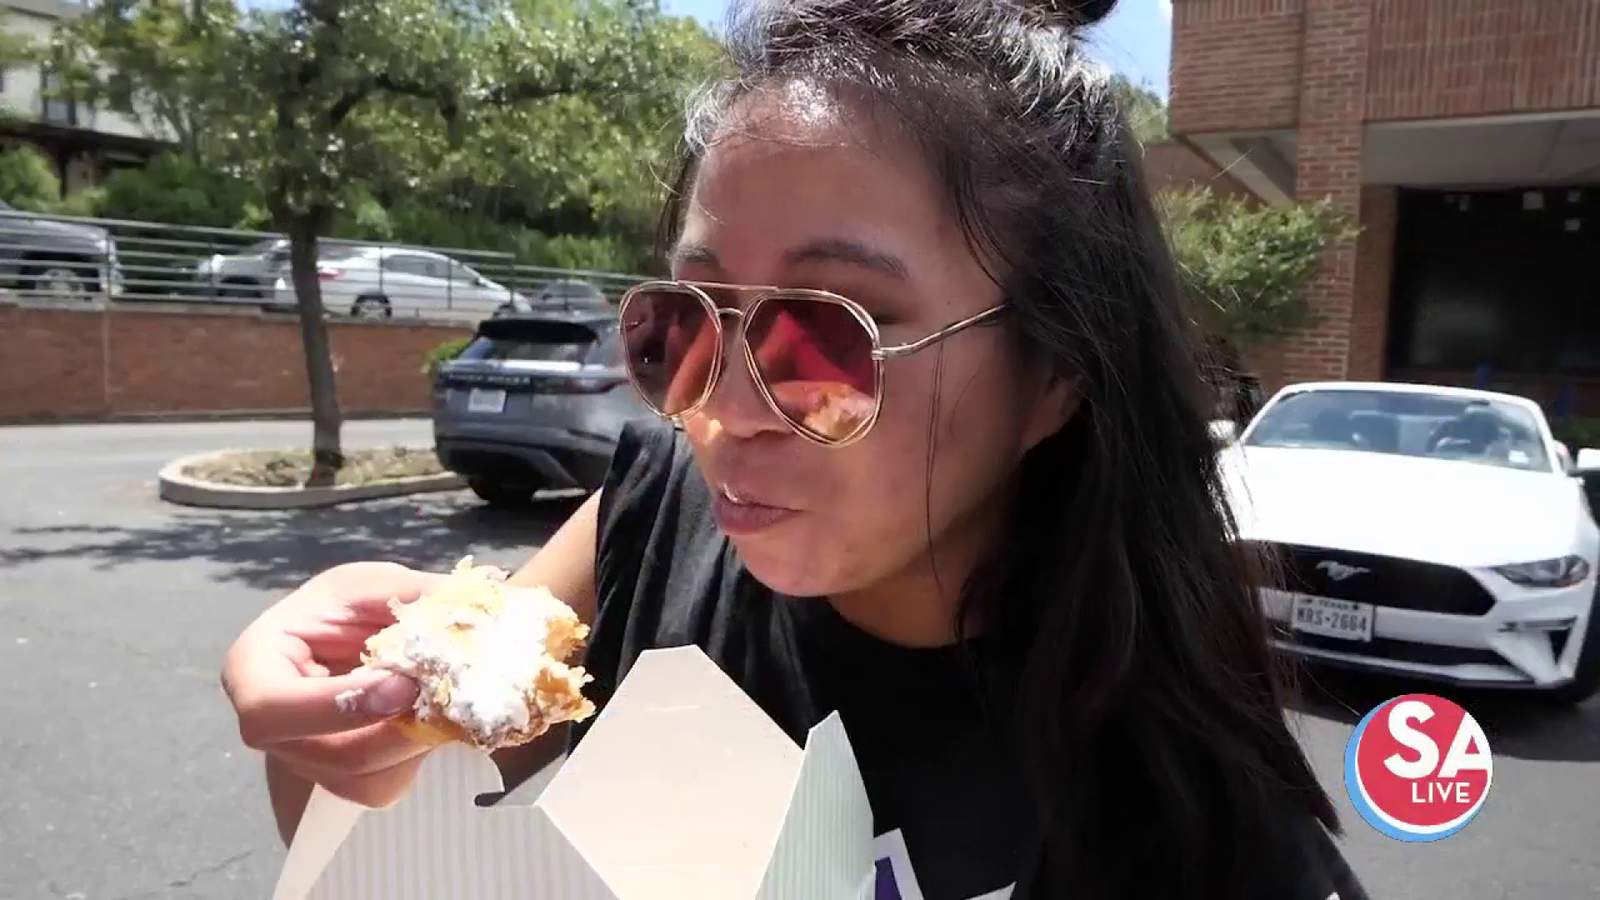 Singer + actress, Christina Milian, stops by Bird Bakery with her beignet food truck